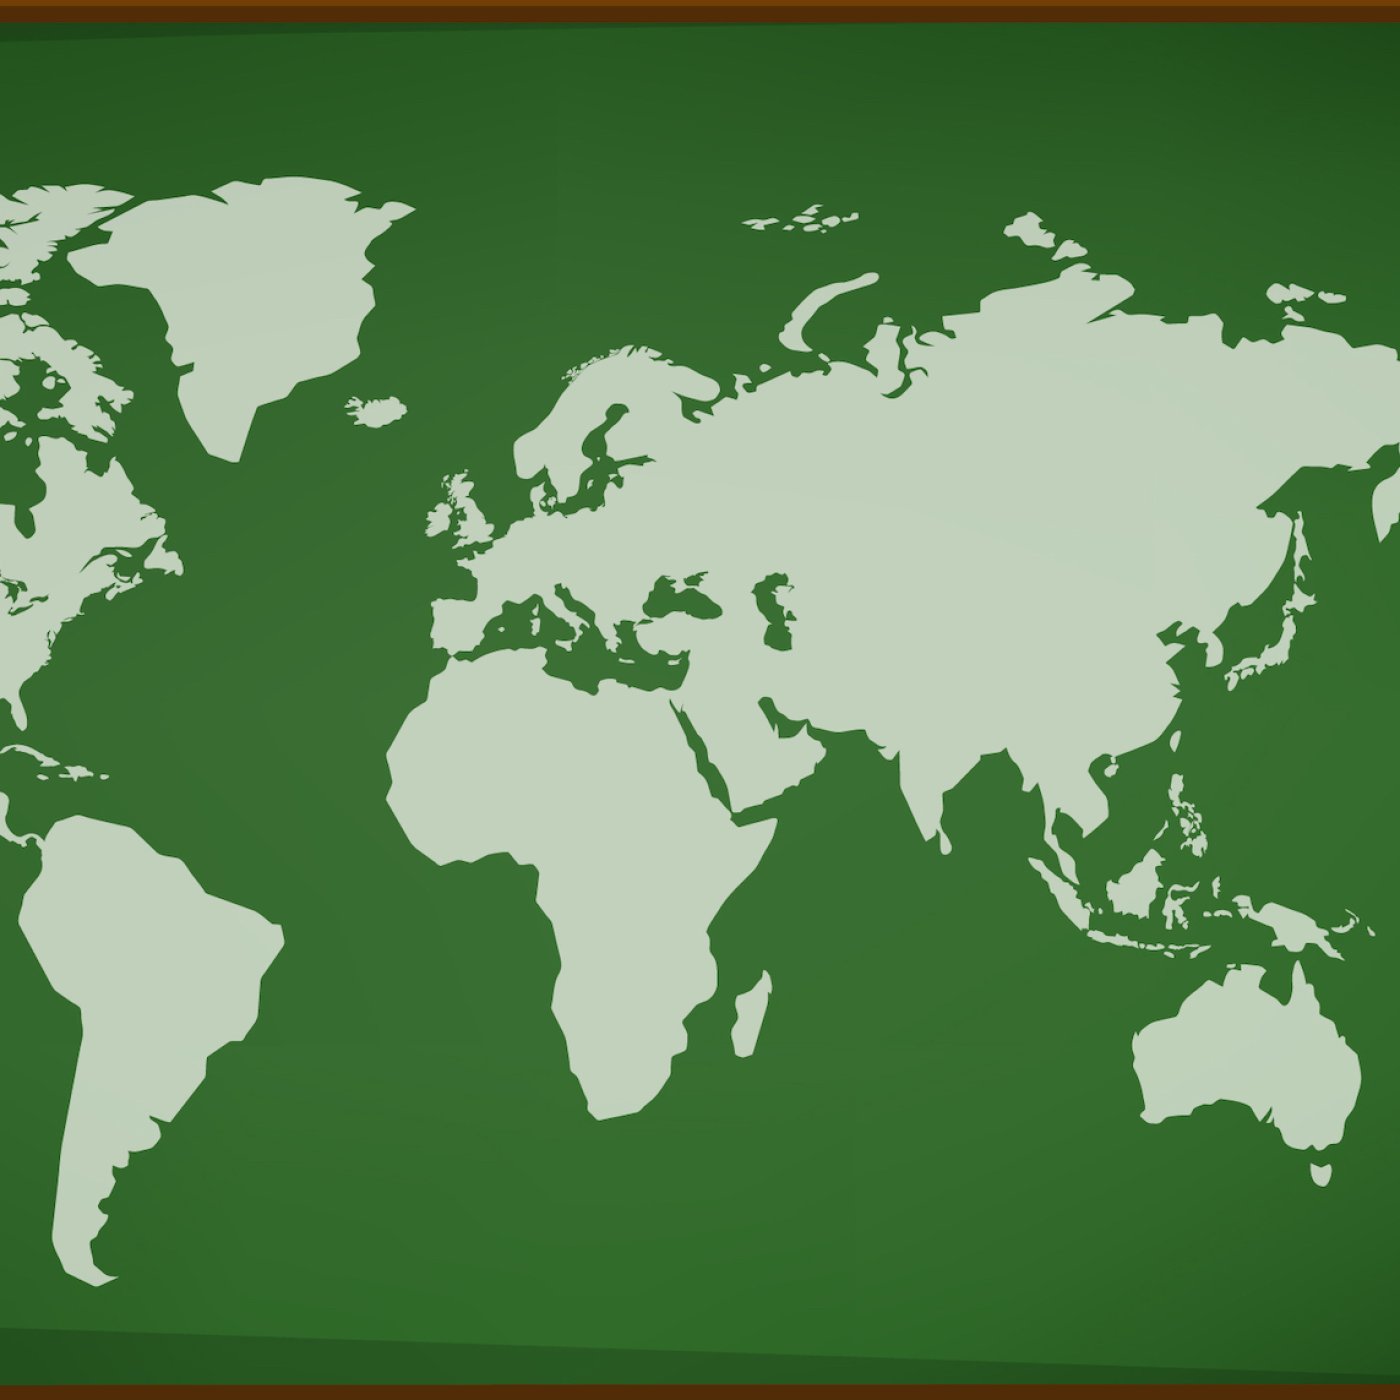 Map of the world against a green background